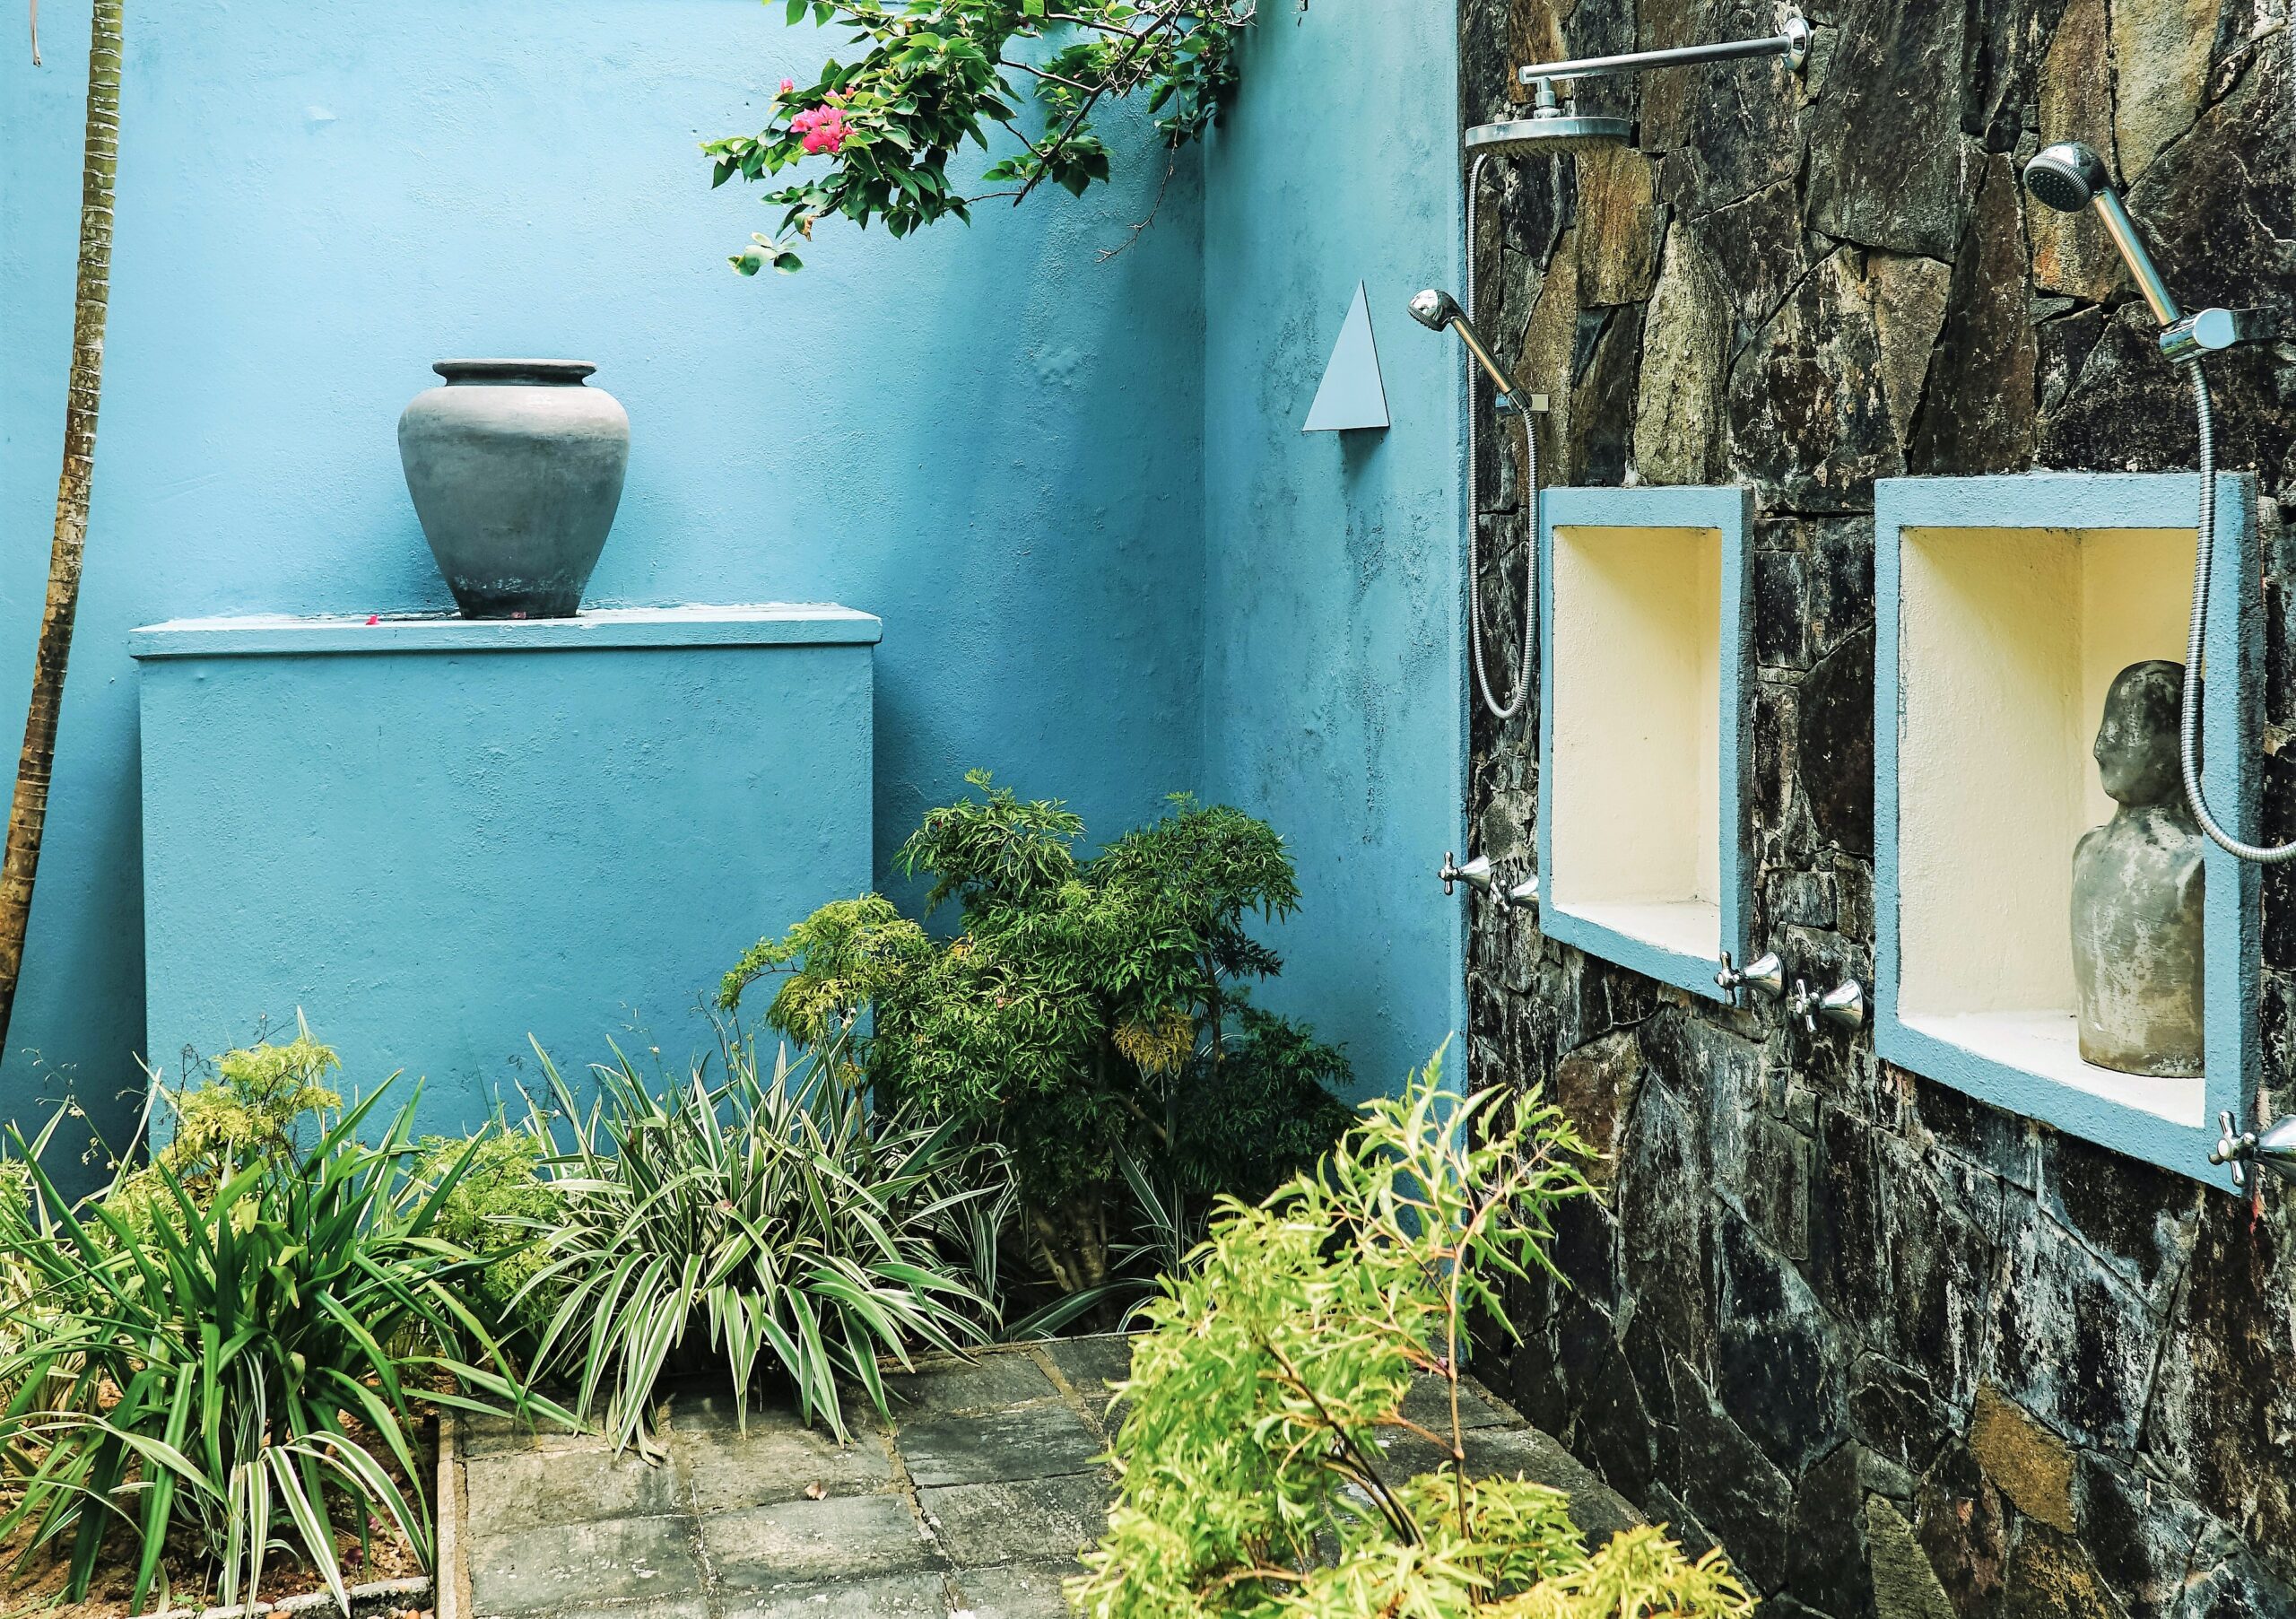 An outdoor shower setting shows bright blue concrete walls and a well drained mix of gravel and stone ground with lots of lush green plants around.